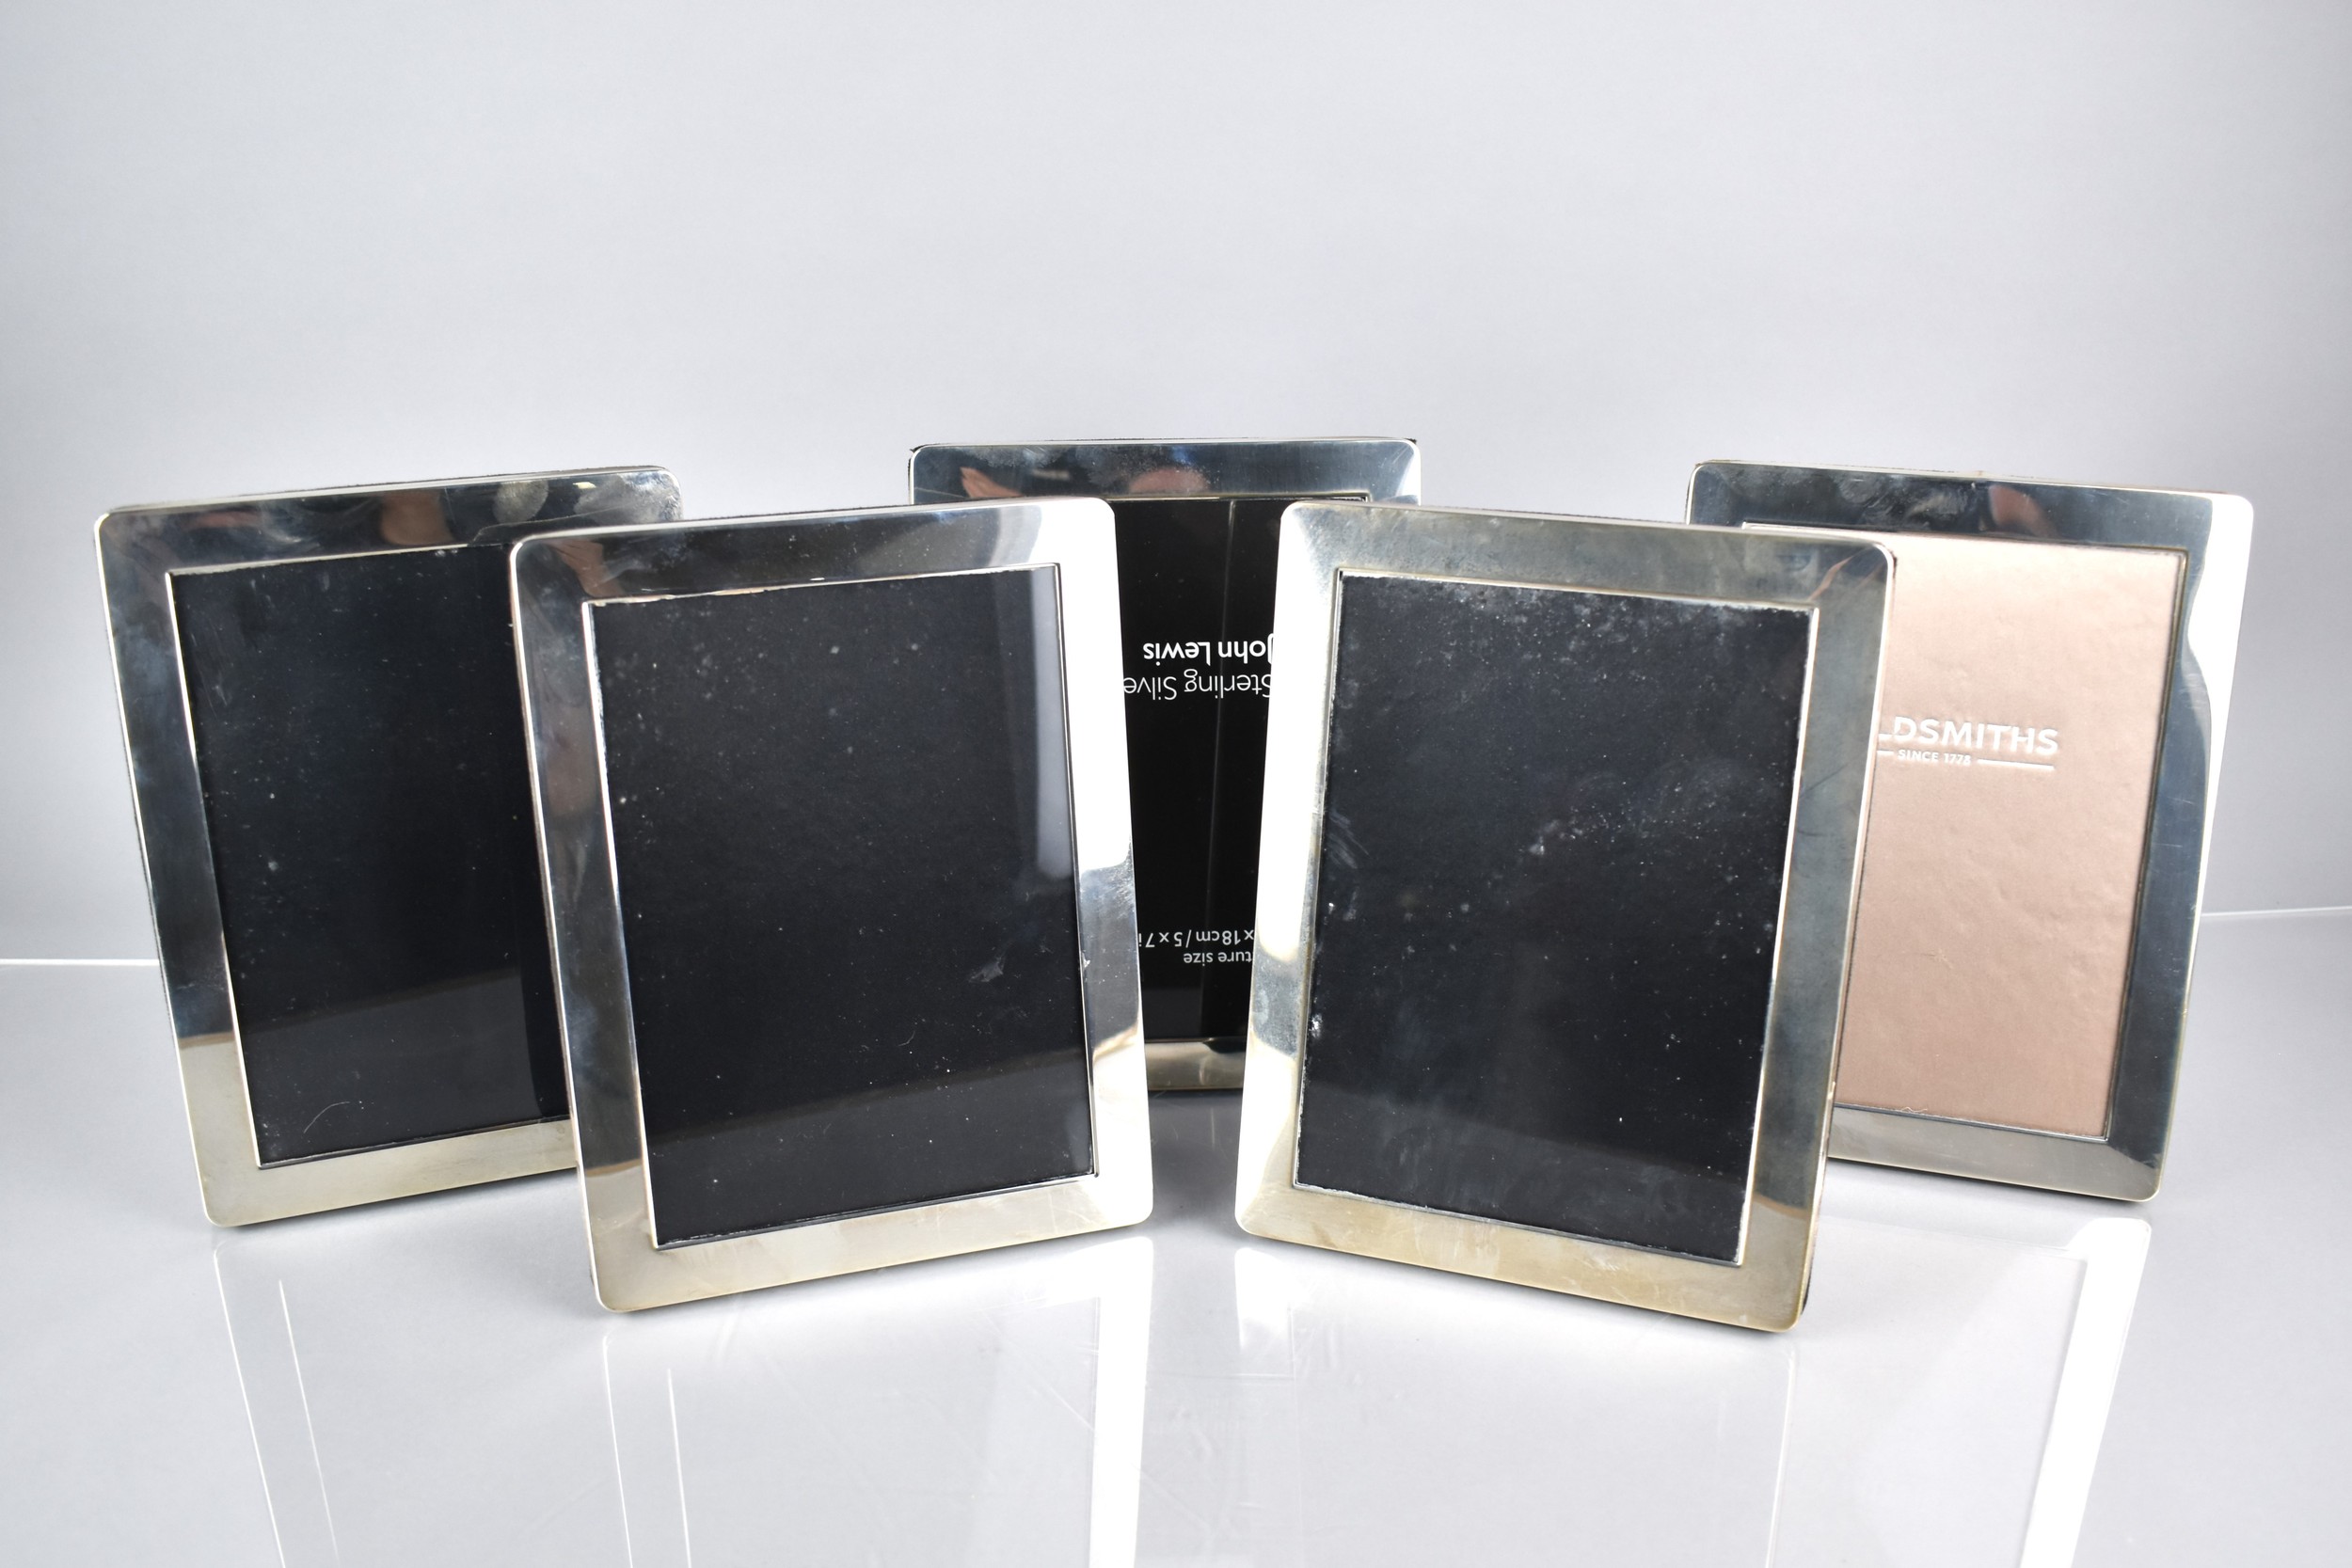 A Set of Five Elizabeth II Silver Picture Frames by George Neal and George Neal, London 2006, to Fir - Image 2 of 2